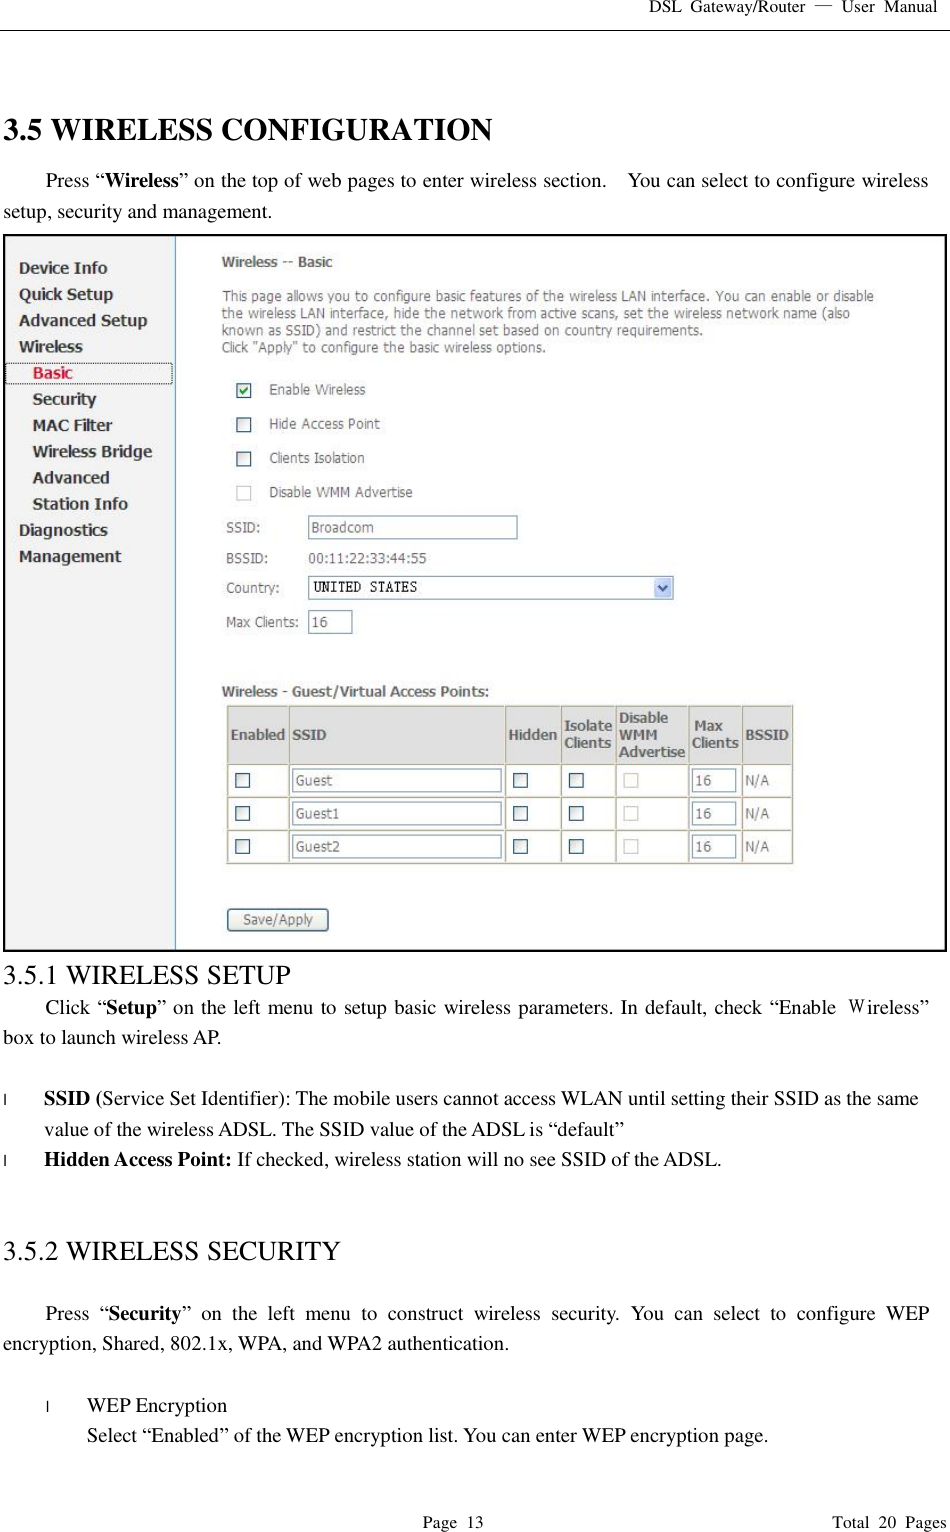 DSL Gateway/Router  — User Manual  Page 13                                       Total 20 Pages   3.5 WIRELESS CONFIGURATION Press “Wireless” on the top of web pages to enter wireless section.  You can select to configure wireless setup, security and management.  3.5.1 WIRELESS SETUP Click “Setup” on the left menu to setup basic wireless parameters. In default, check “Enable  Ｗireless” box to launch wireless AP.  l  SSID (Service Set Identifier): The mobile users cannot access WLAN until setting their SSID as the same value of the wireless ADSL. The SSID value of the ADSL is “default” l  Hidden Access Point: If checked, wireless station will no see SSID of the ADSL.   3.5.2 WIRELESS SECURITY  Press  “Security” on the left menu to construct wireless security. You can select to configure WEP encryption, Shared, 802.1x, WPA, and WPA2 authentication.  l  WEP Encryption Select “Enabled” of the WEP encryption list. You can enter WEP encryption page. 